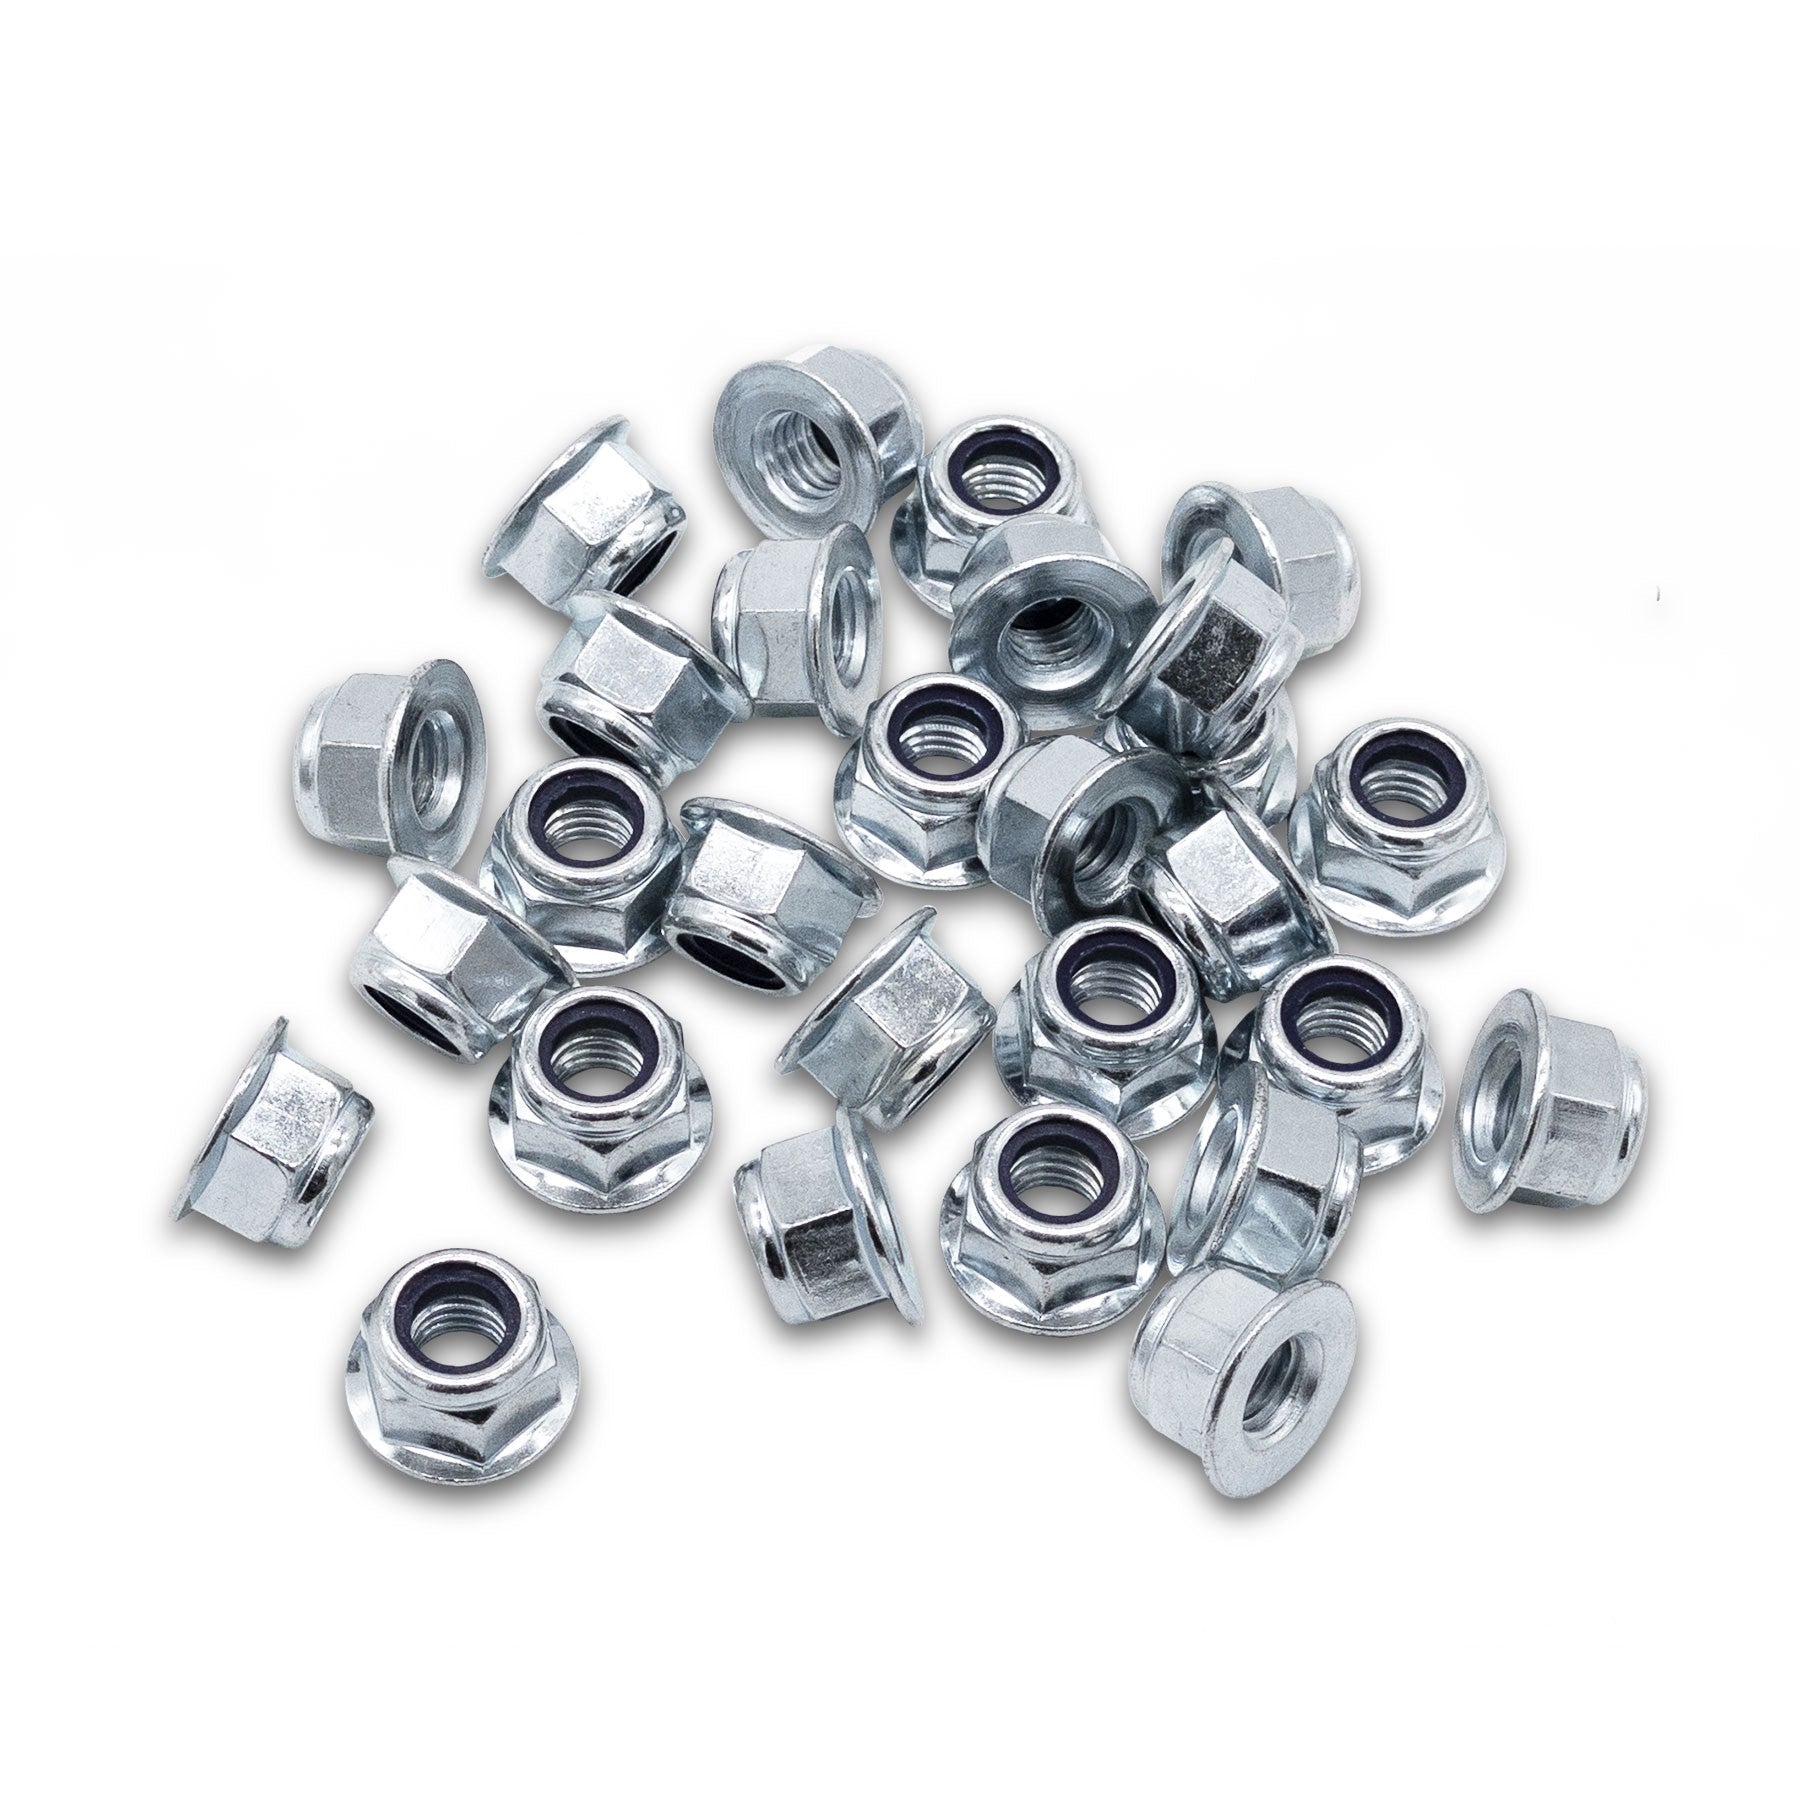 Nut Nyloc Flanged 6mm Pack Of 50